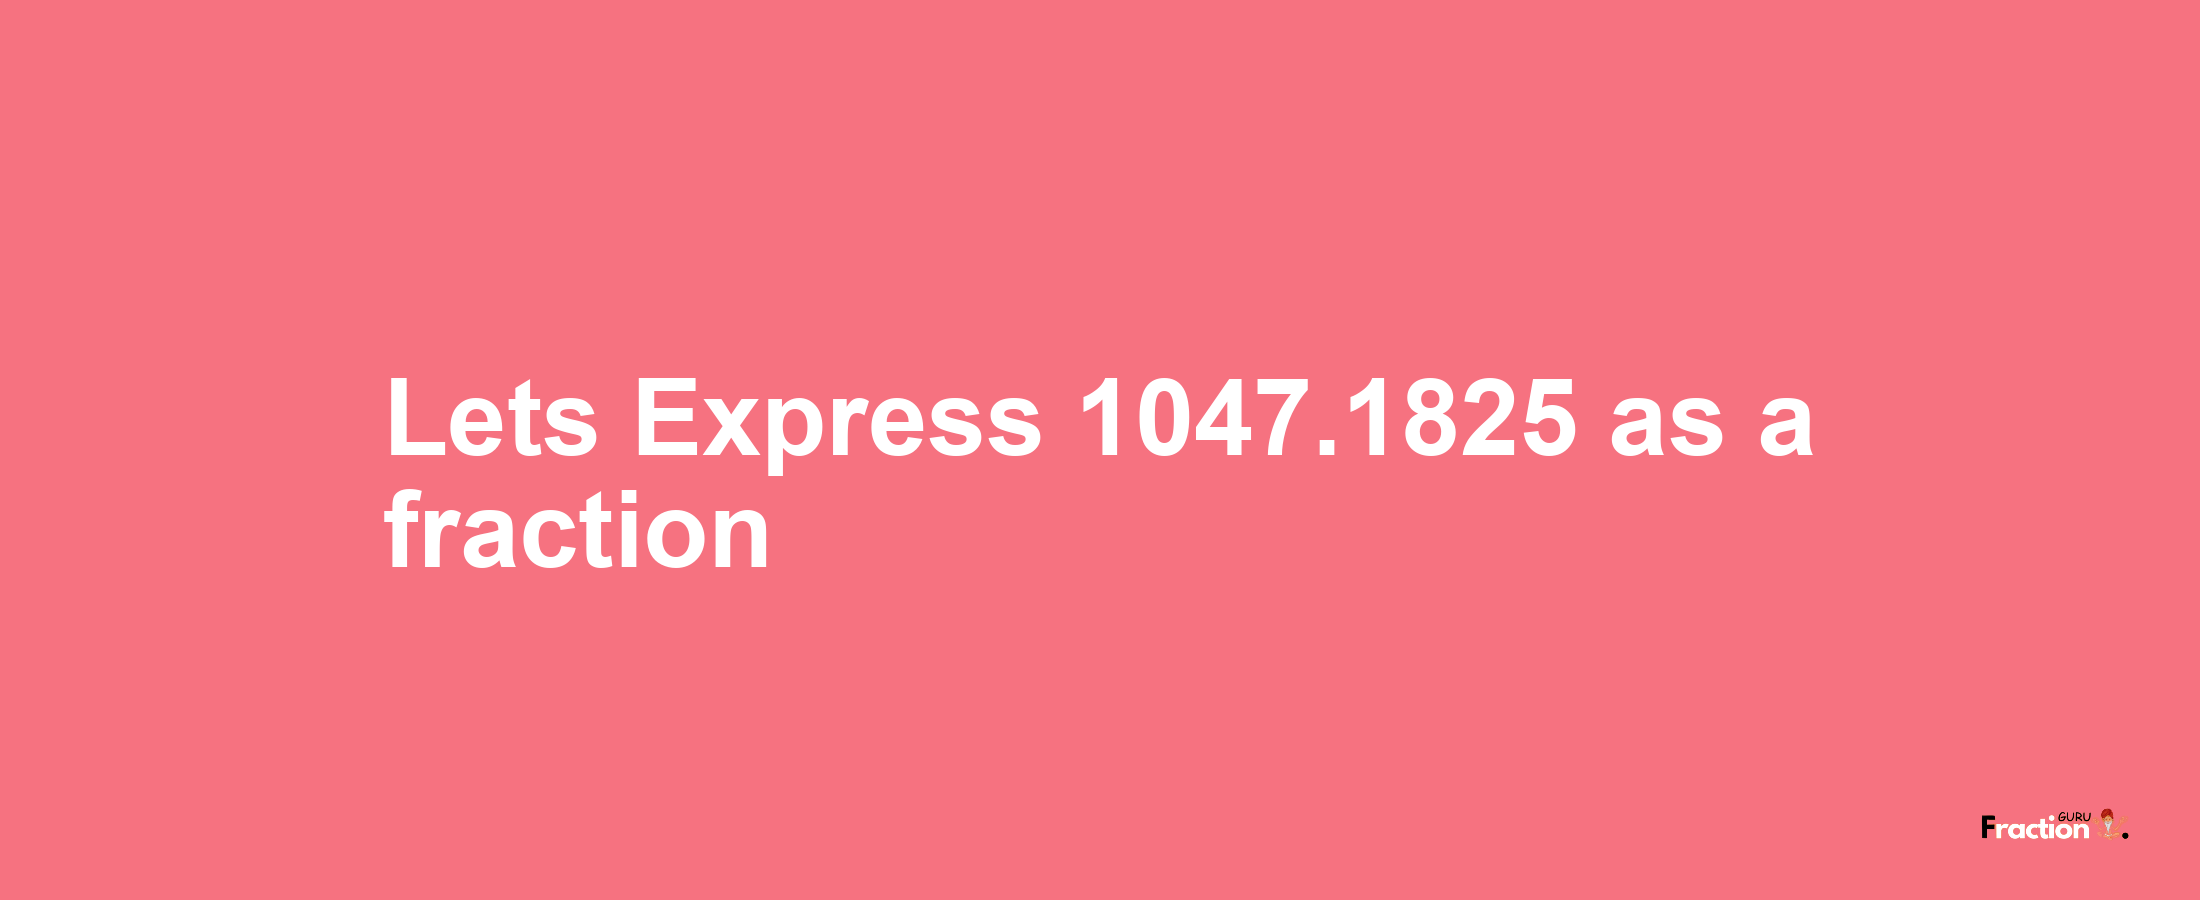 Lets Express 1047.1825 as afraction